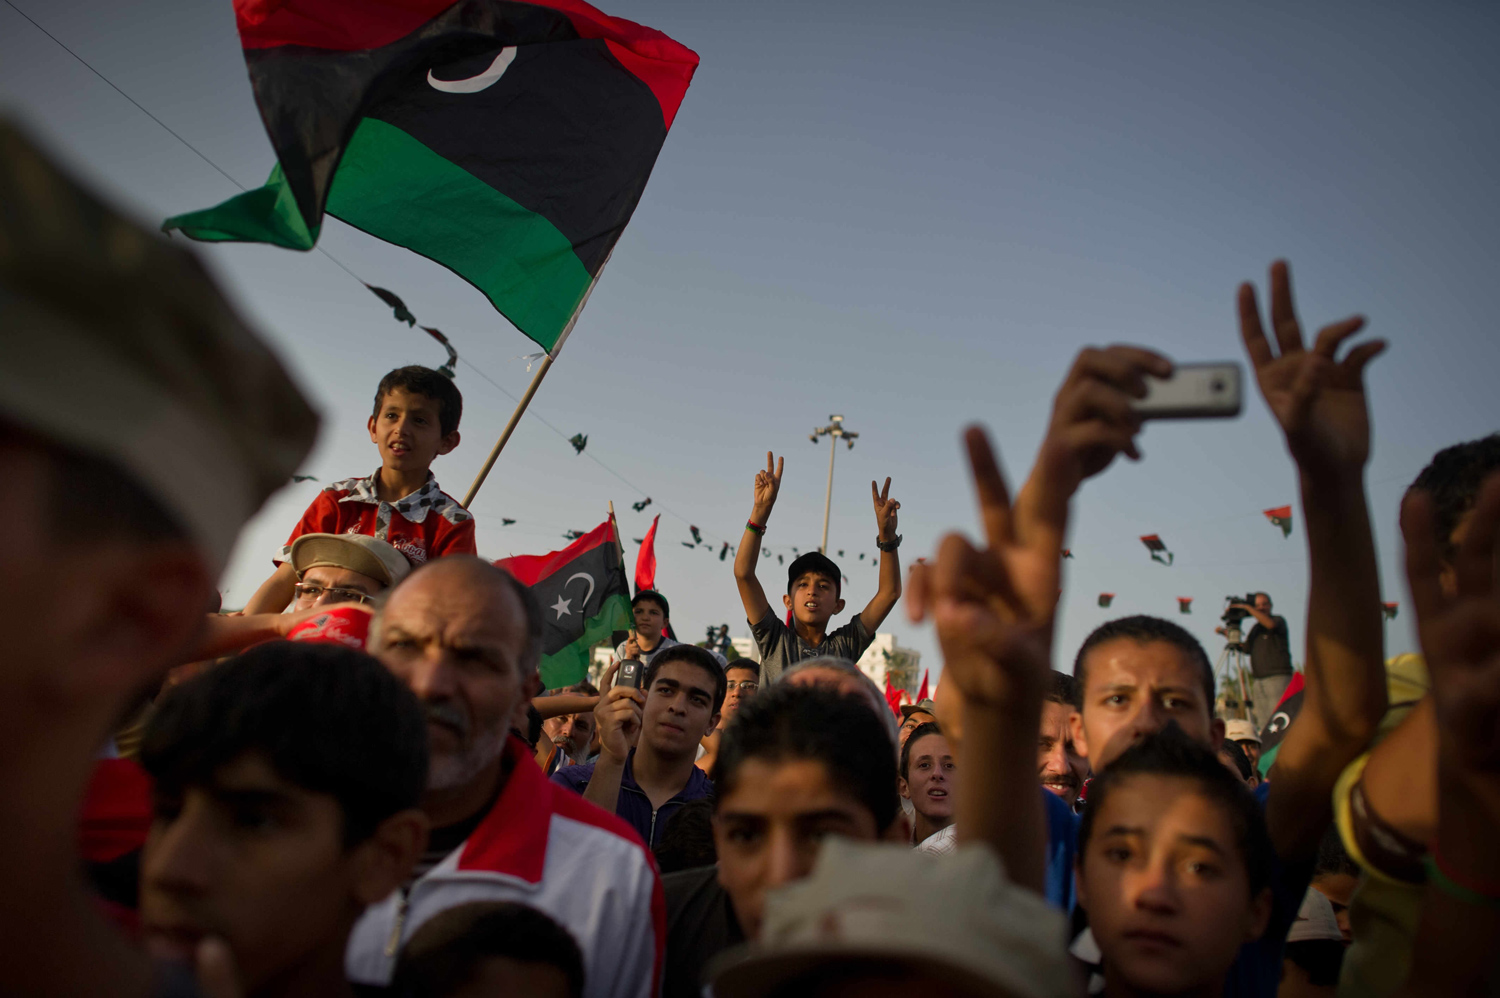 Oct. 25, 2011. Libyans in the city of Misrata celebrate following the official declaration of liberation of the entire country.